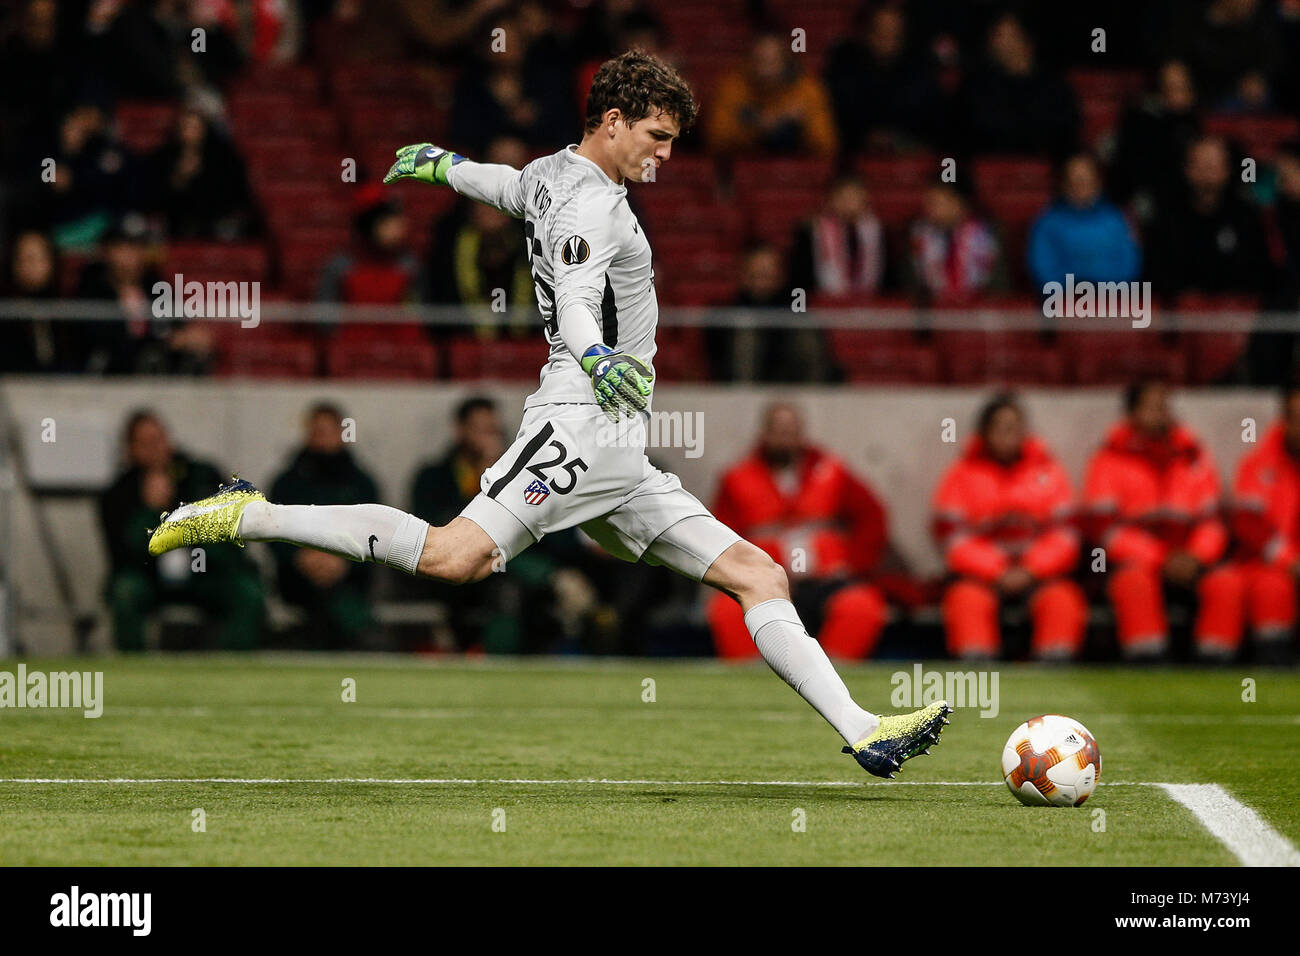 Madrid, Spain. 8th Mar, 2018. Axel Werner (Atletico de Madrid) in action  during the match UEFA Europa League match between Atletico de Madrid vs  Lokomotiv Moscu at the Wanda Metropolitano stadium in